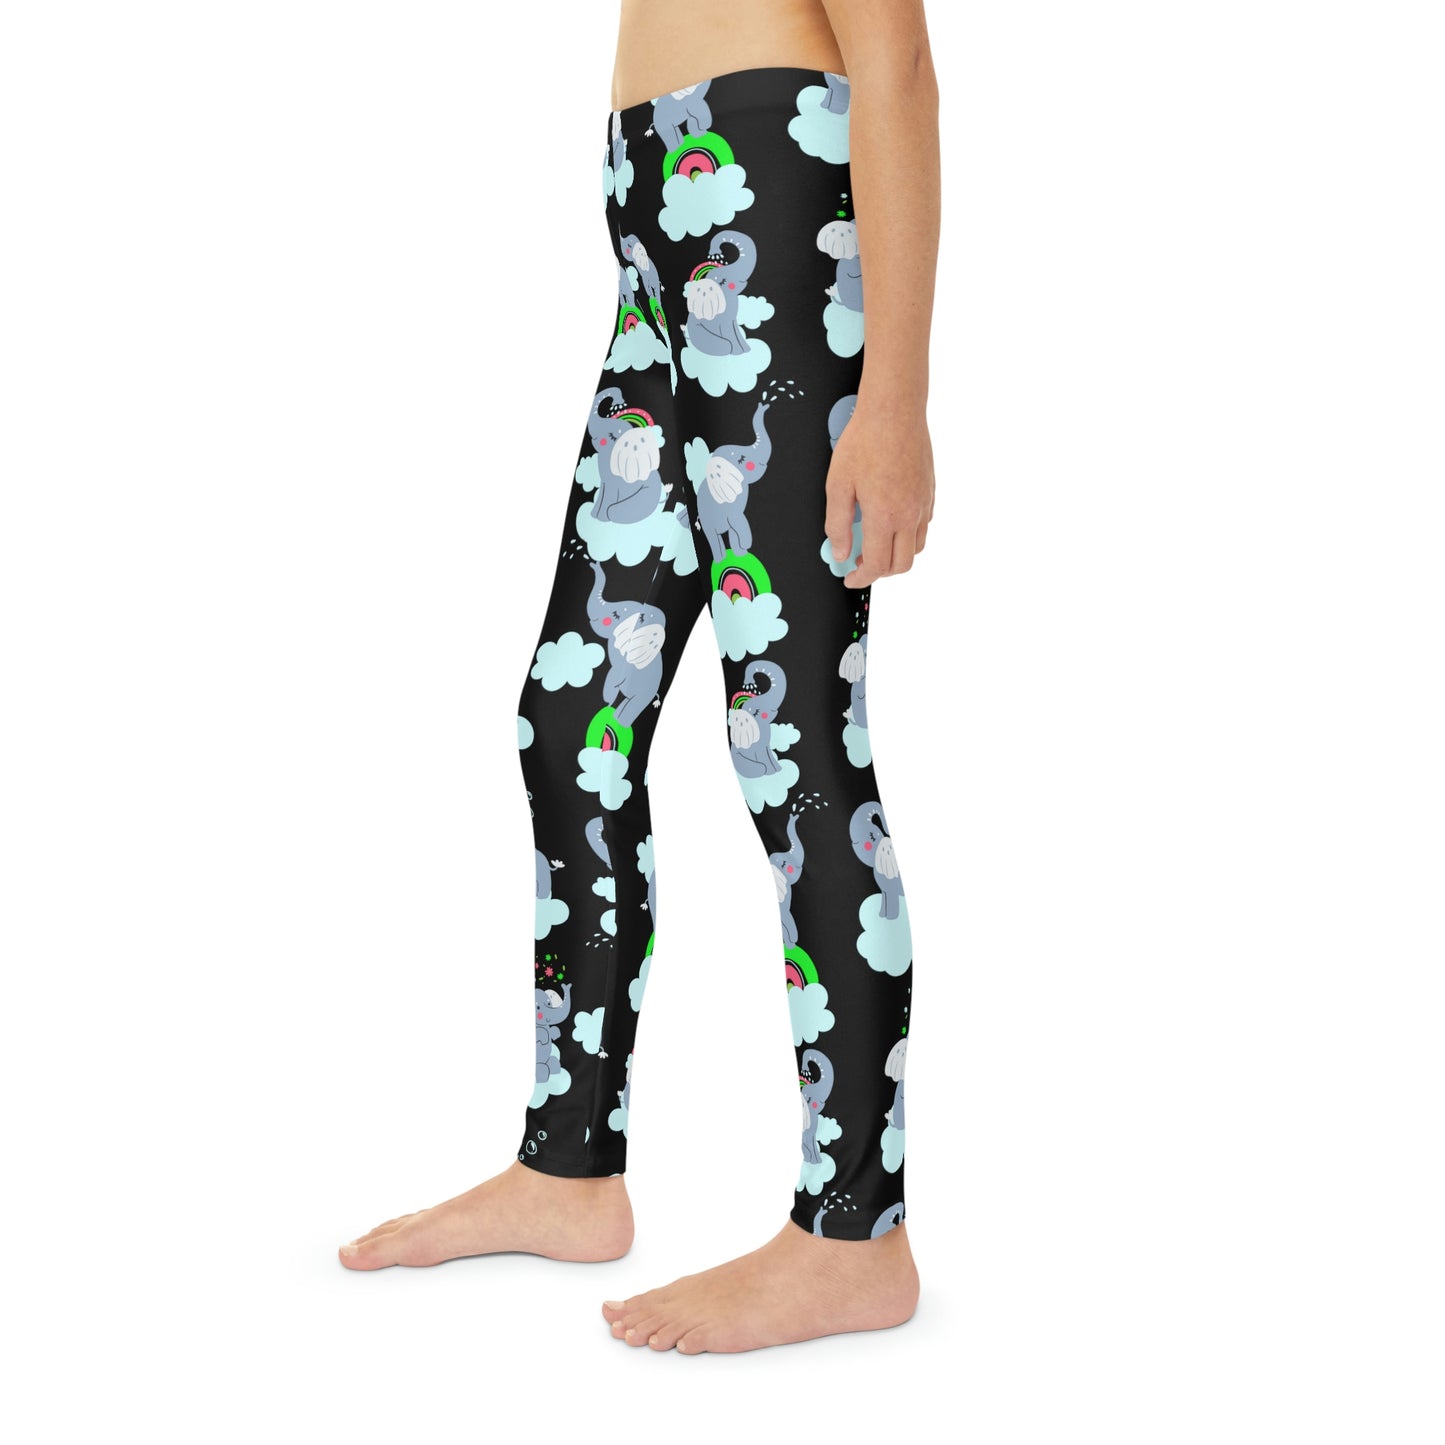 Elephant animal kingdom, Safari Youth Leggings, One of a Kind Gift - Unique Workout Activewear tights for kids, Daughter, Niece Christmas Gift